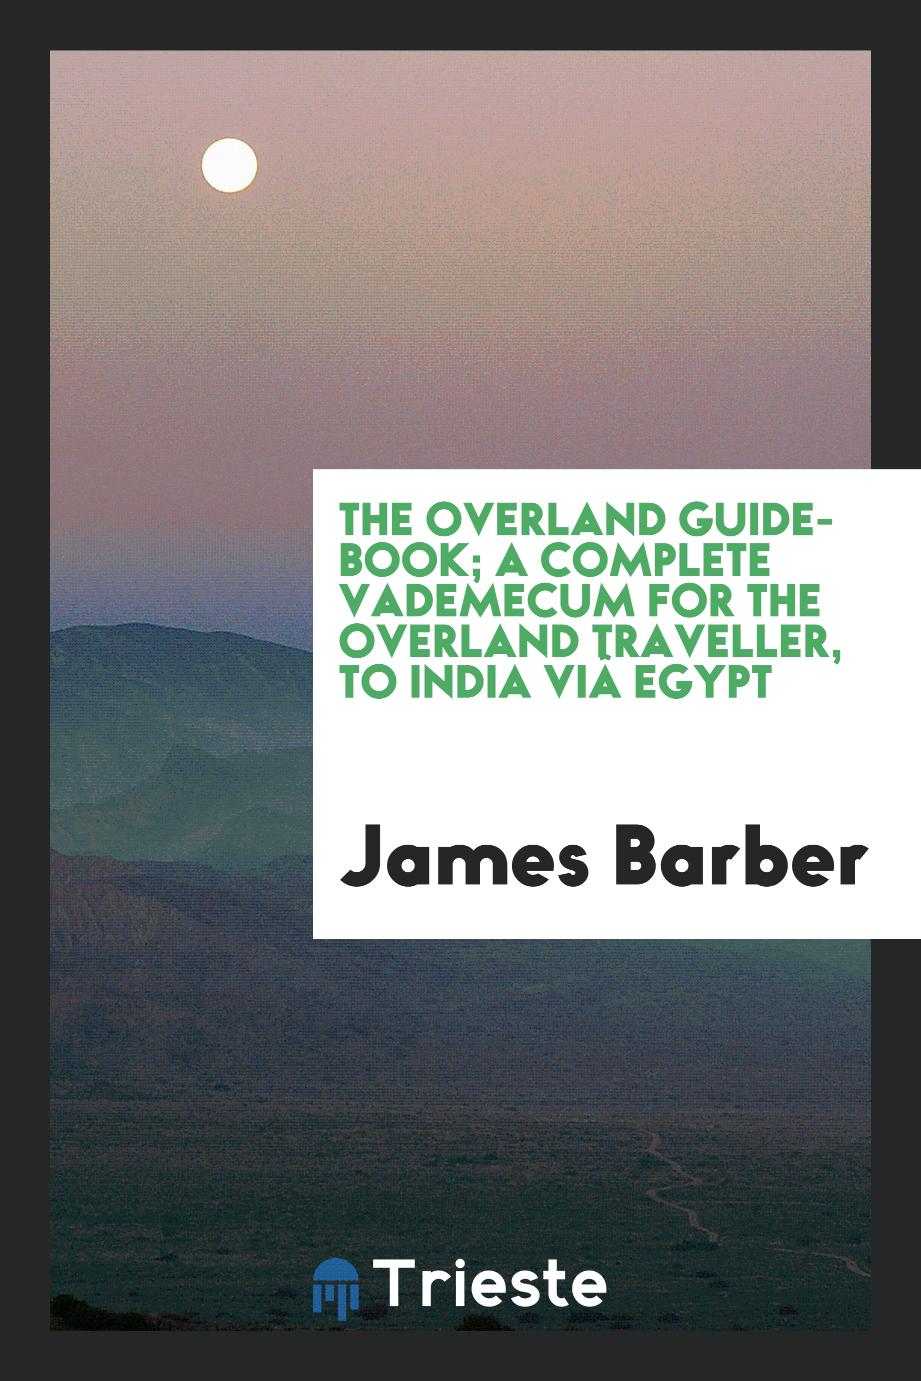 The overland guide-book; a complete vademecum for the overland traveller, to India viâ Egypt